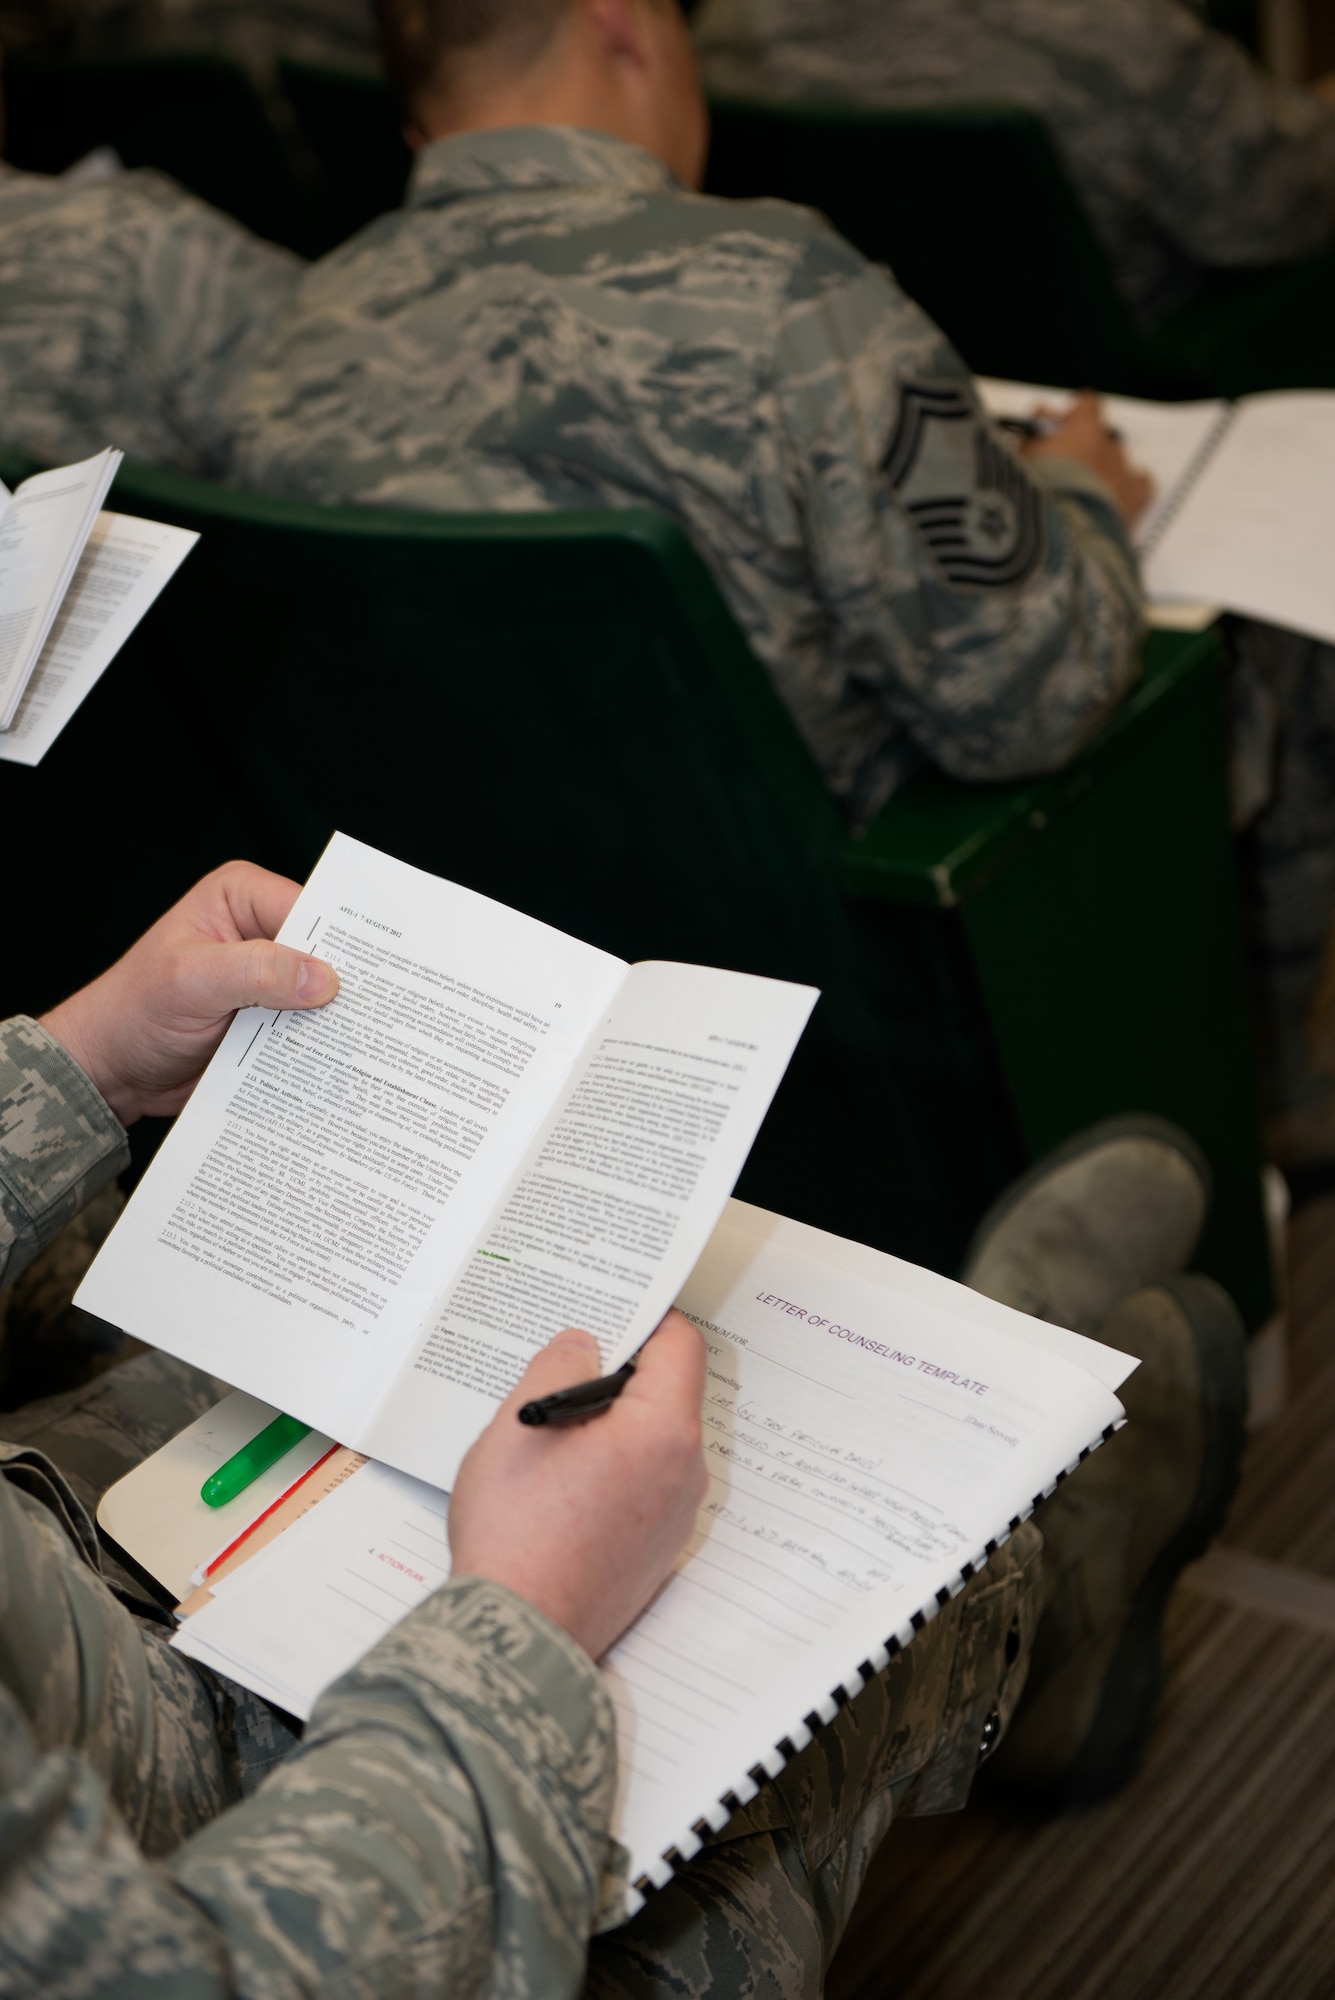 Airmen complete a letter of counseling template during the legal boot camp seminar March 10, 2018 at Pease Air National Guard Base, N.H. The seminar is designed to educate supervisors about the methods of progressive discipline. (U.S Air National Guard photo by A1C Victoria Nelson)